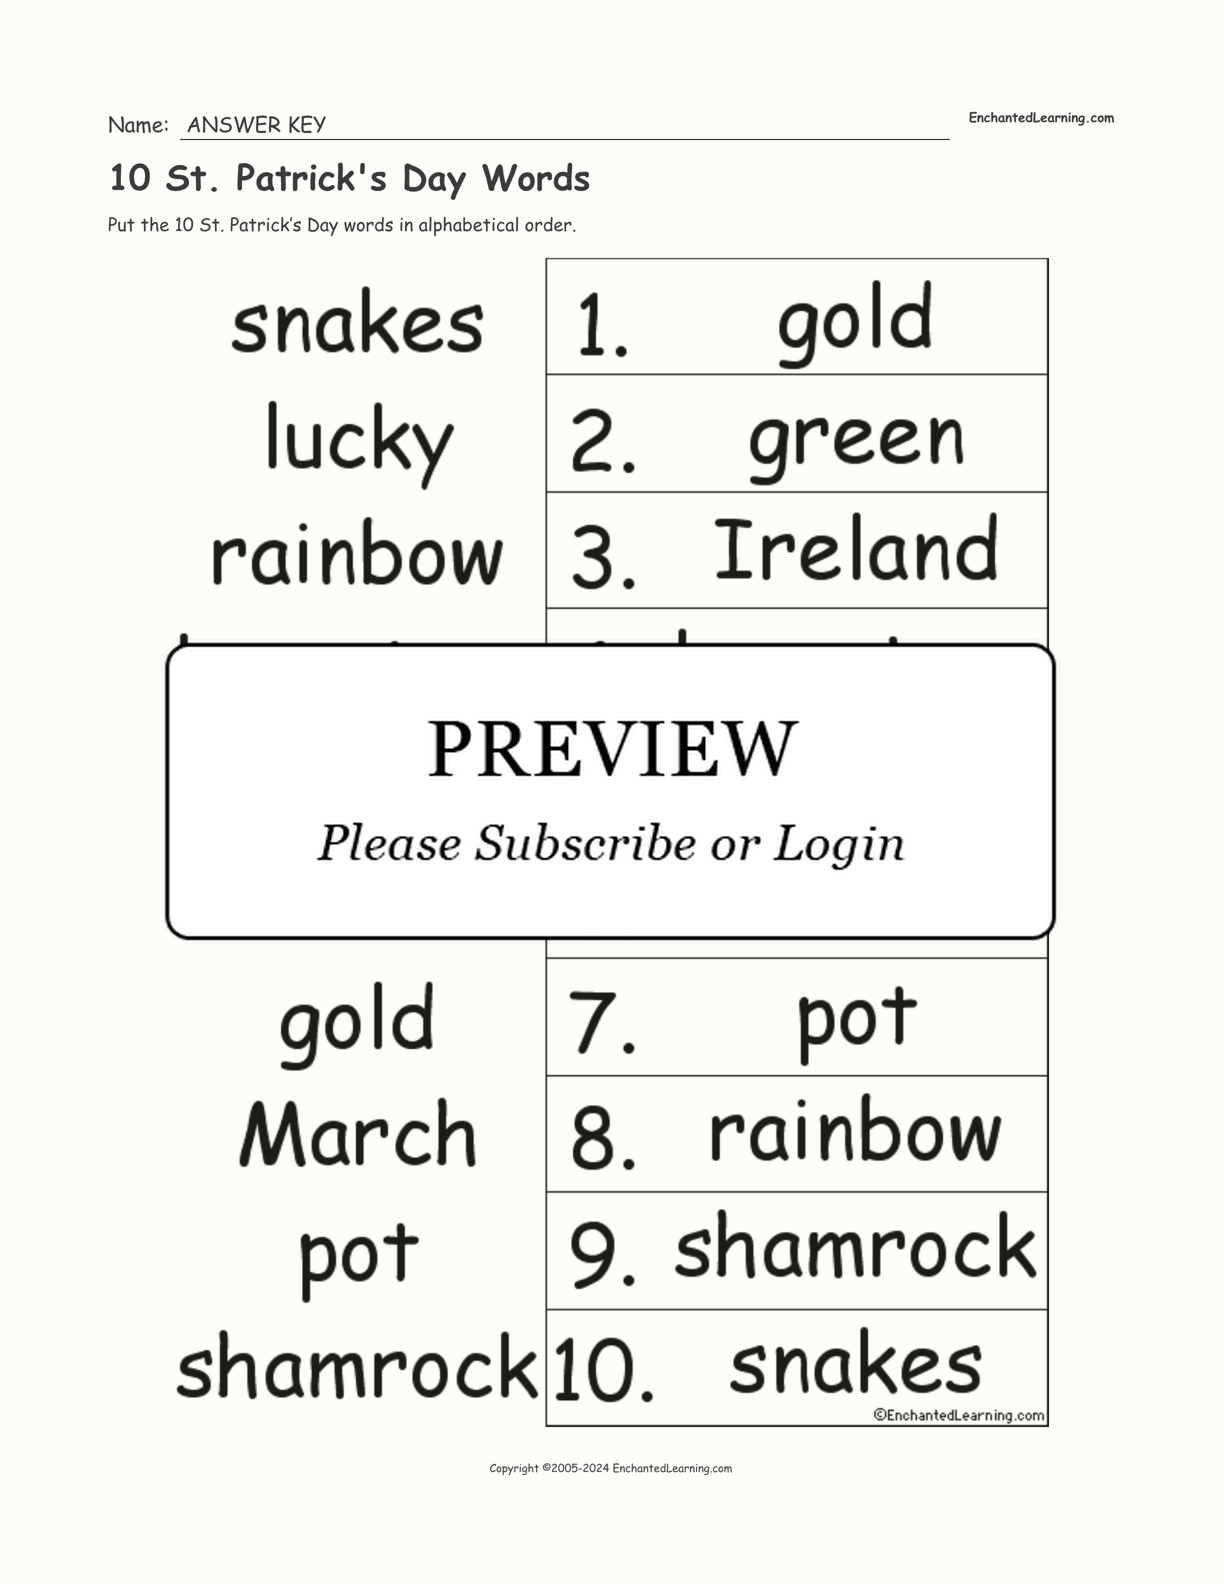 10 St. Patrick's Day Words interactive worksheet page 2